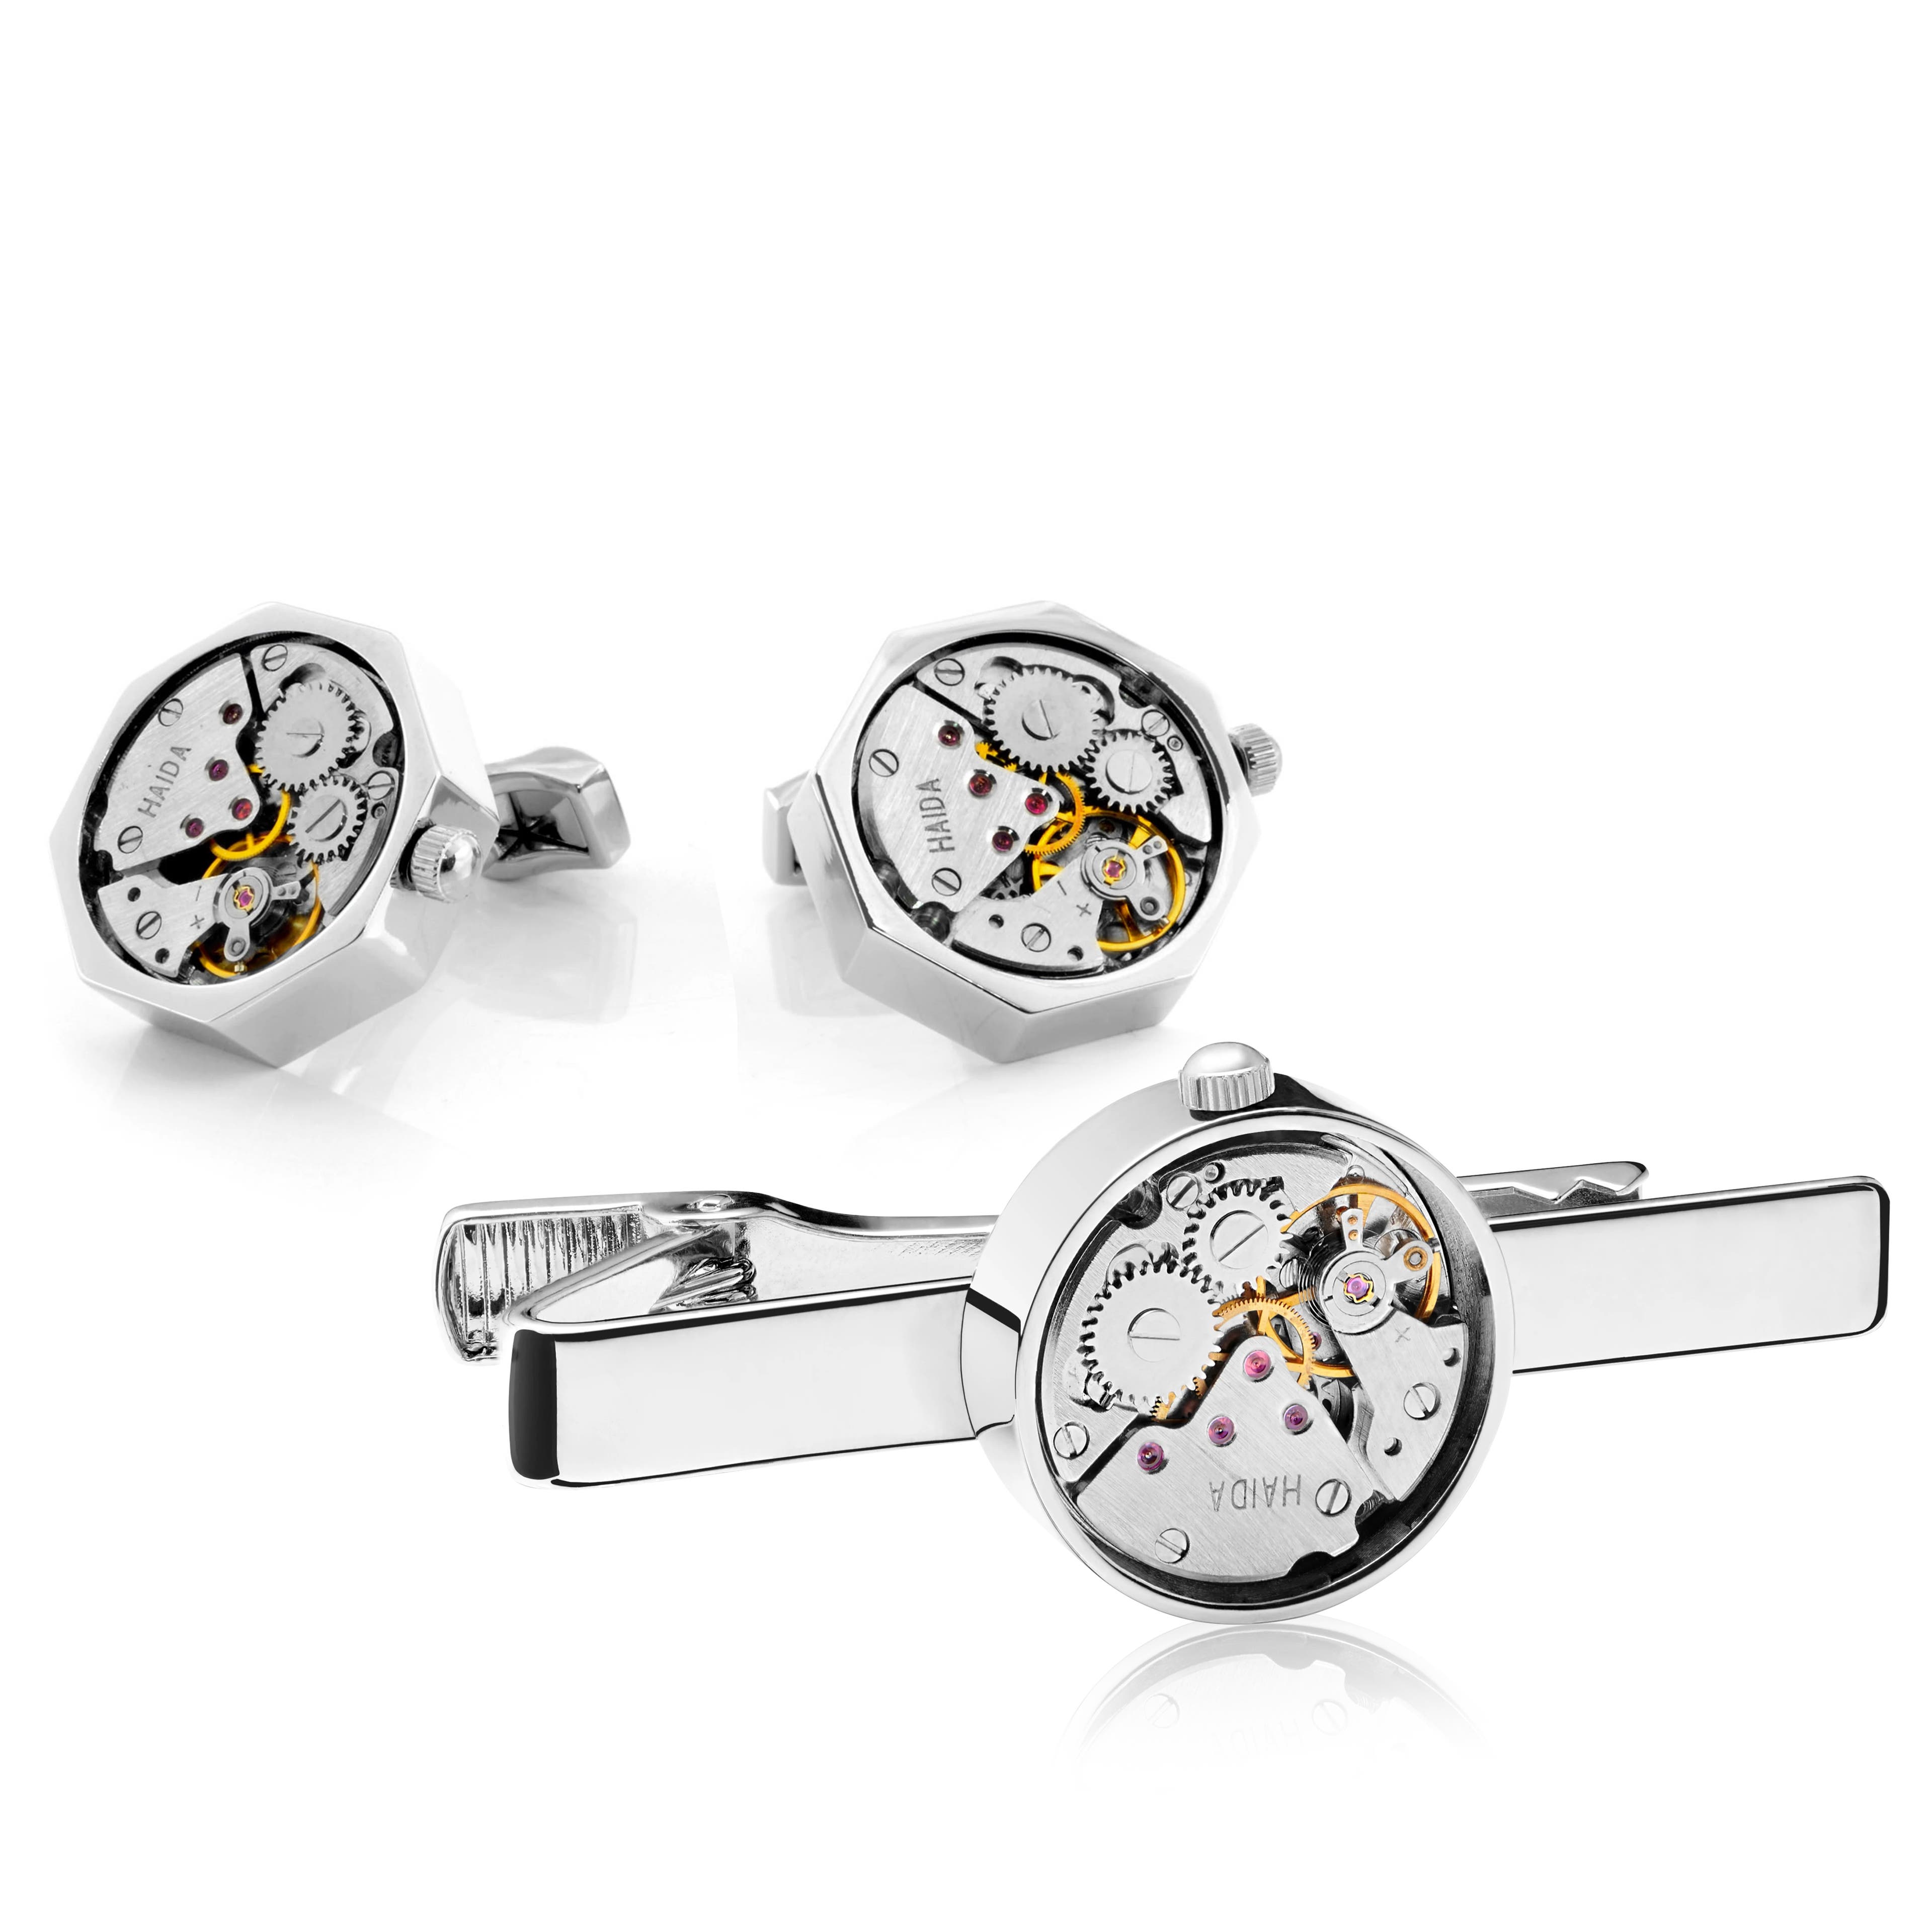 Silver-Tone Mechanical Movement Tie Clip and Cufflinks Set